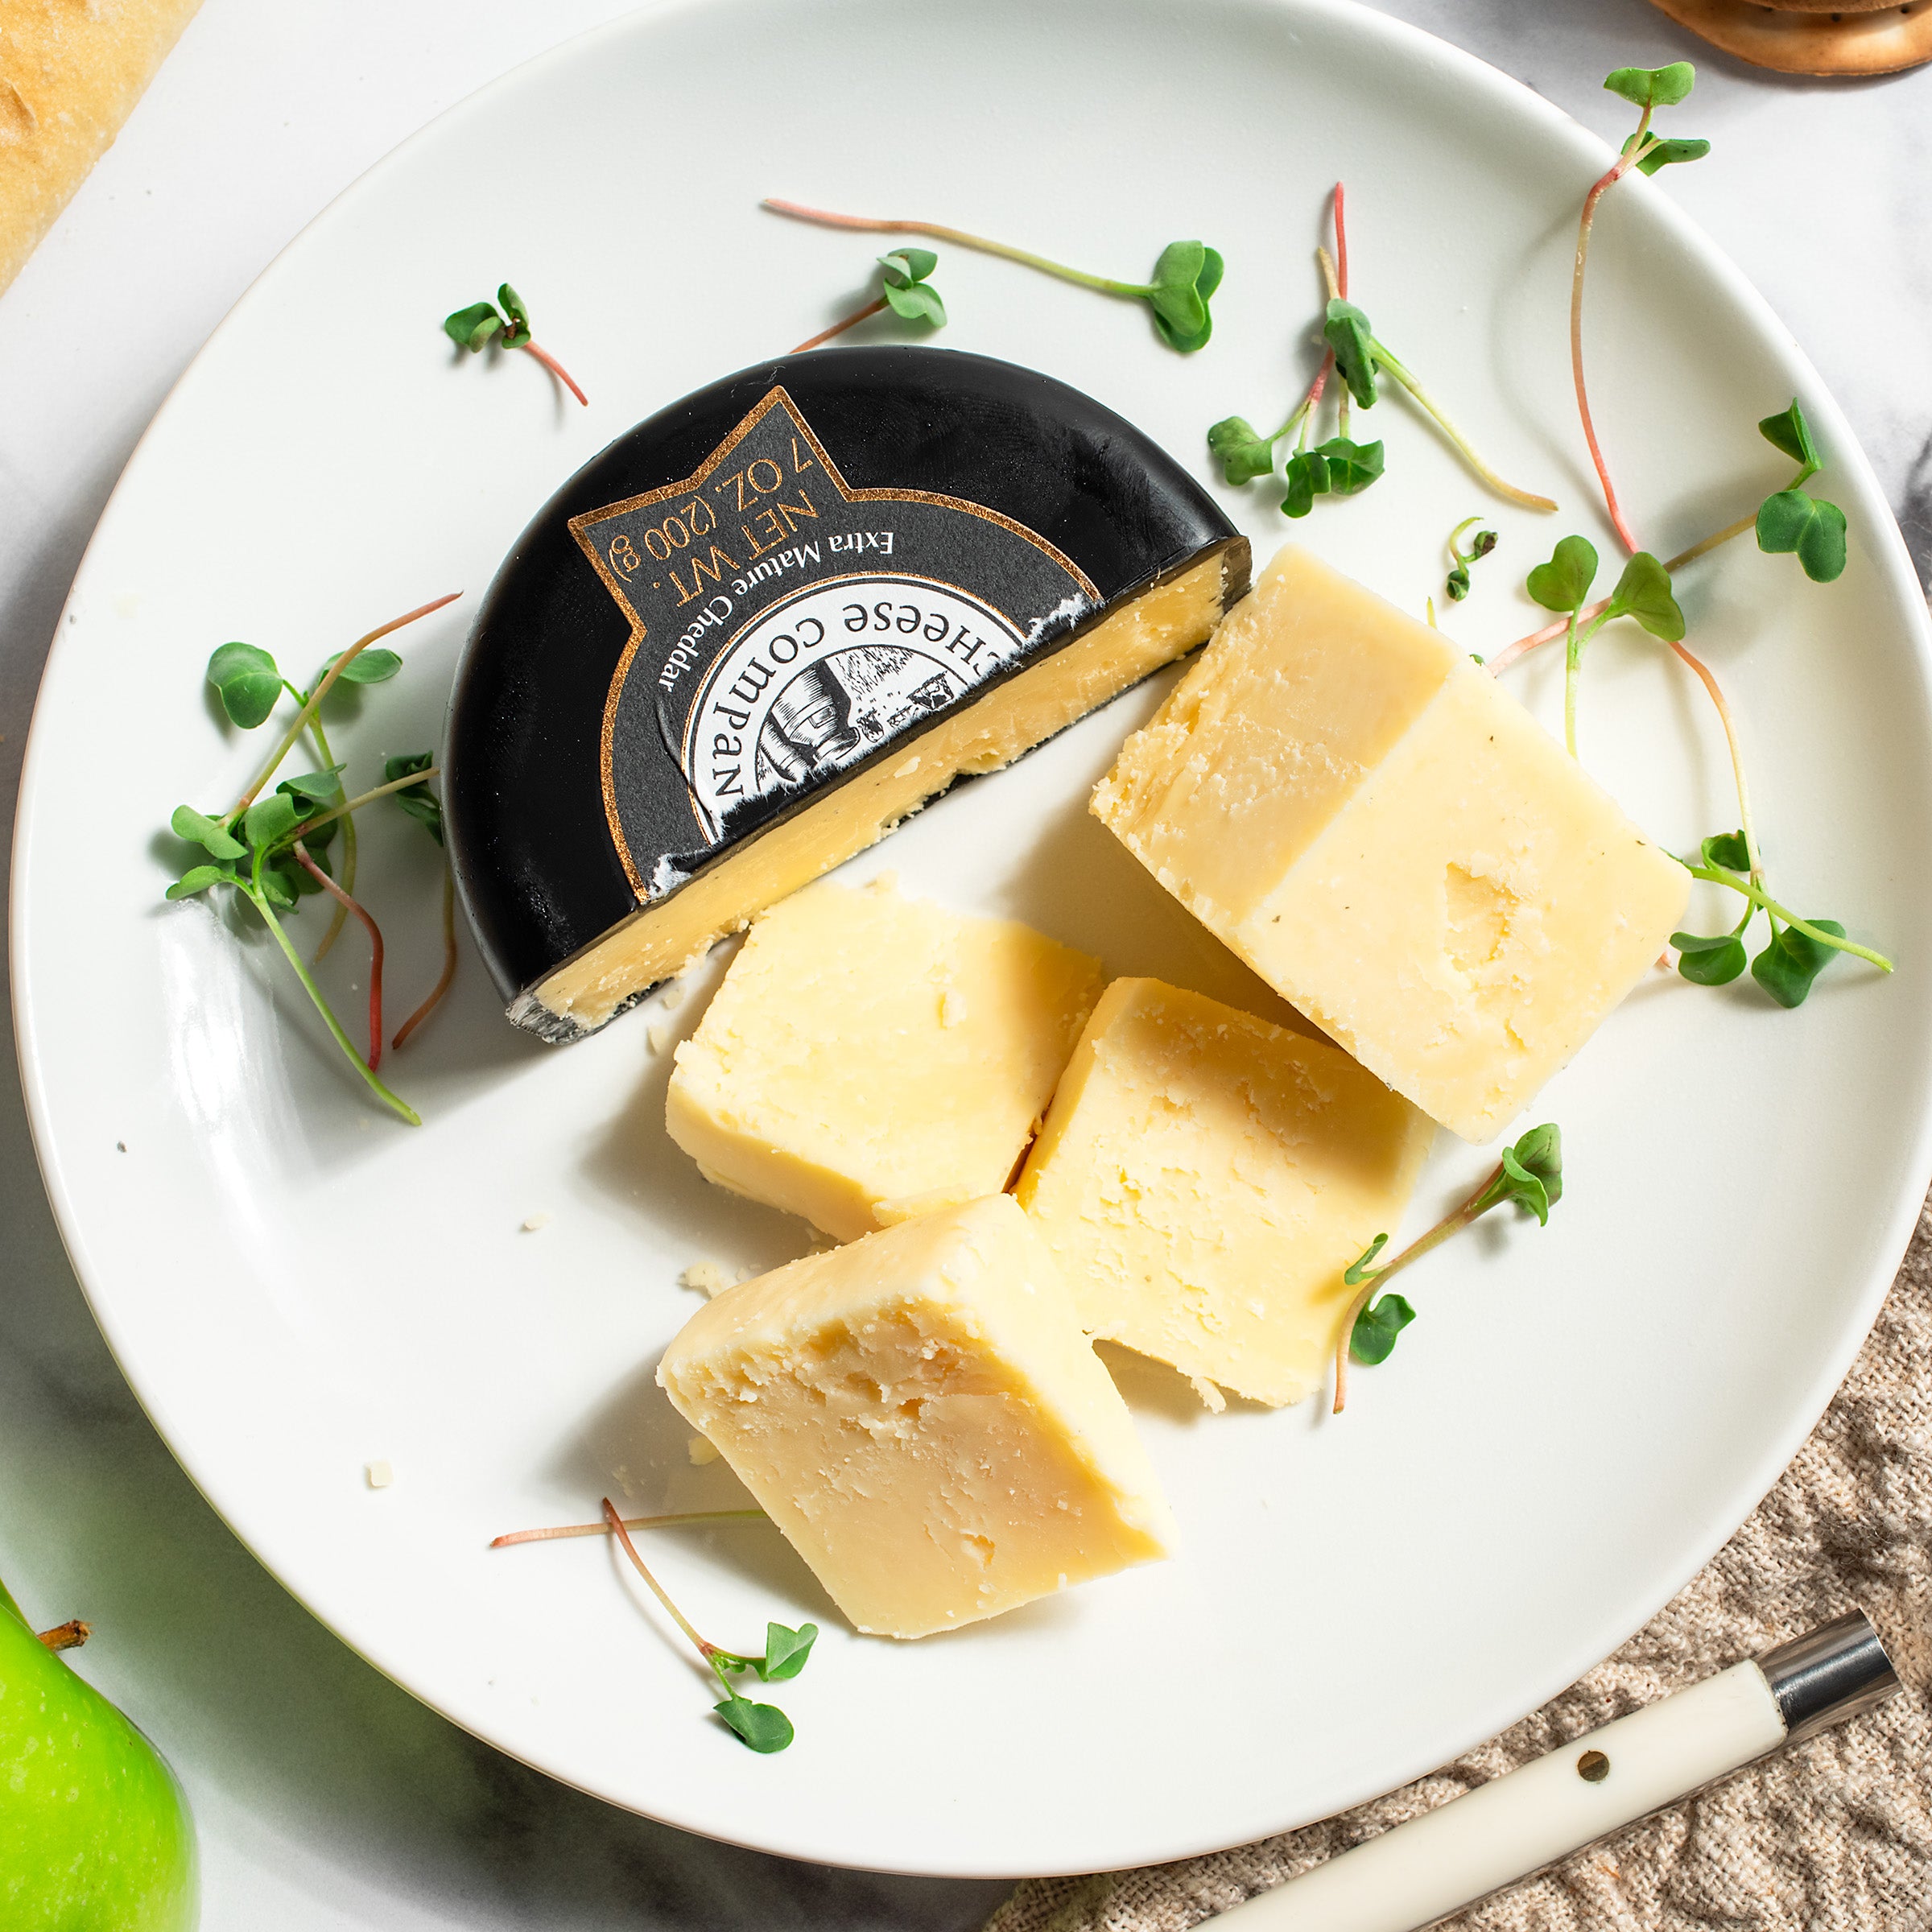 igourmet_2449-5_Little Black Bomber Welsh Truckle Cheese - Mature Cheddar_Snowdonia Cheese Company_cheese